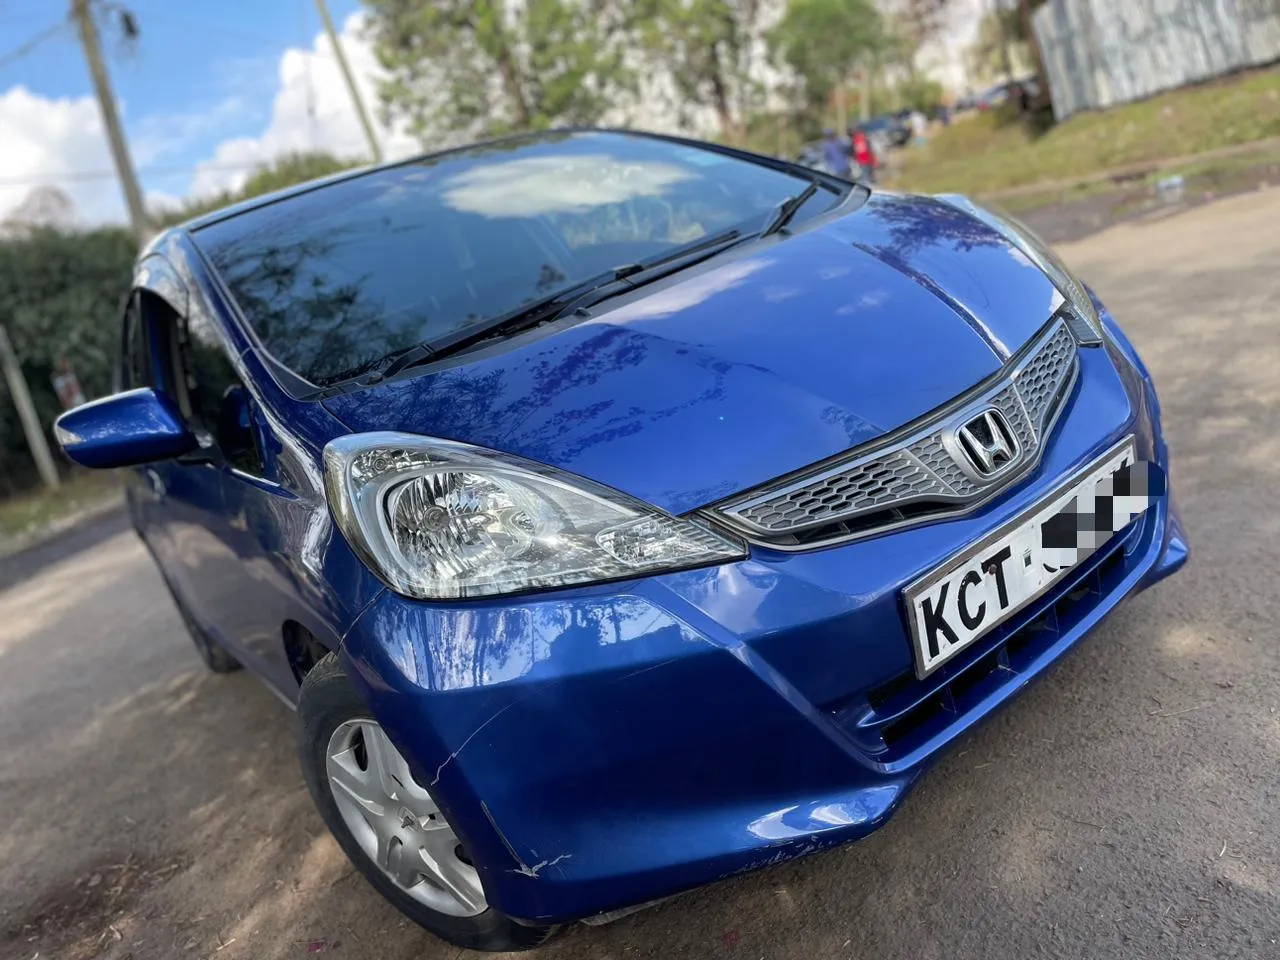 Honda fit 2011 CLEAN You Pay 20% Deposit Trade in OK Wow